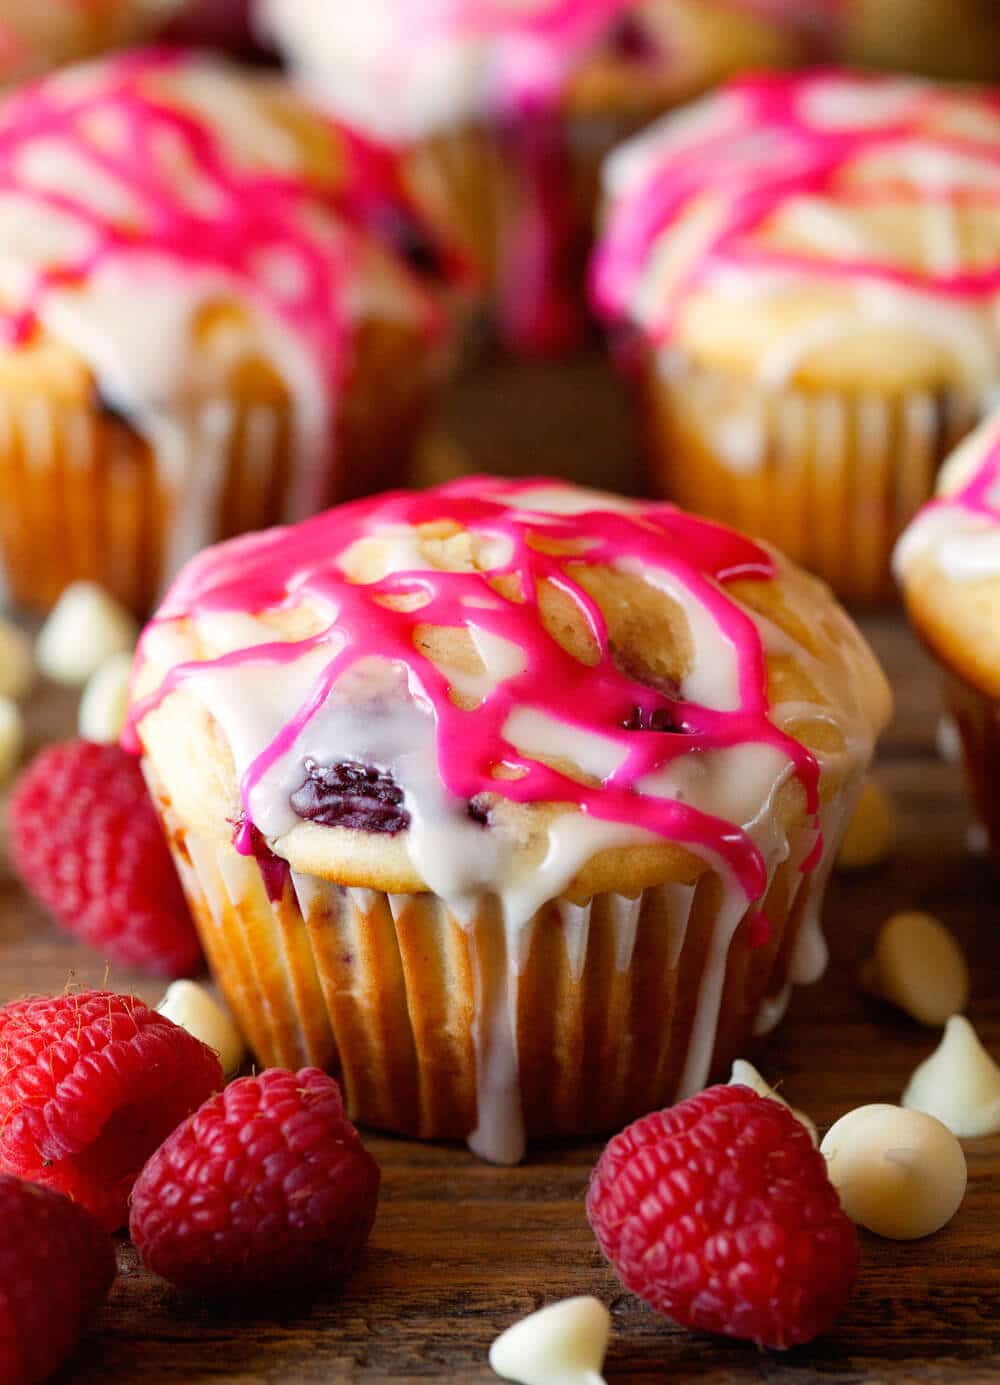 Raspberry Muffin on wooden background topped with white and pink glaze. Fresh raspberries and white chocolate chips laying next to muffins.